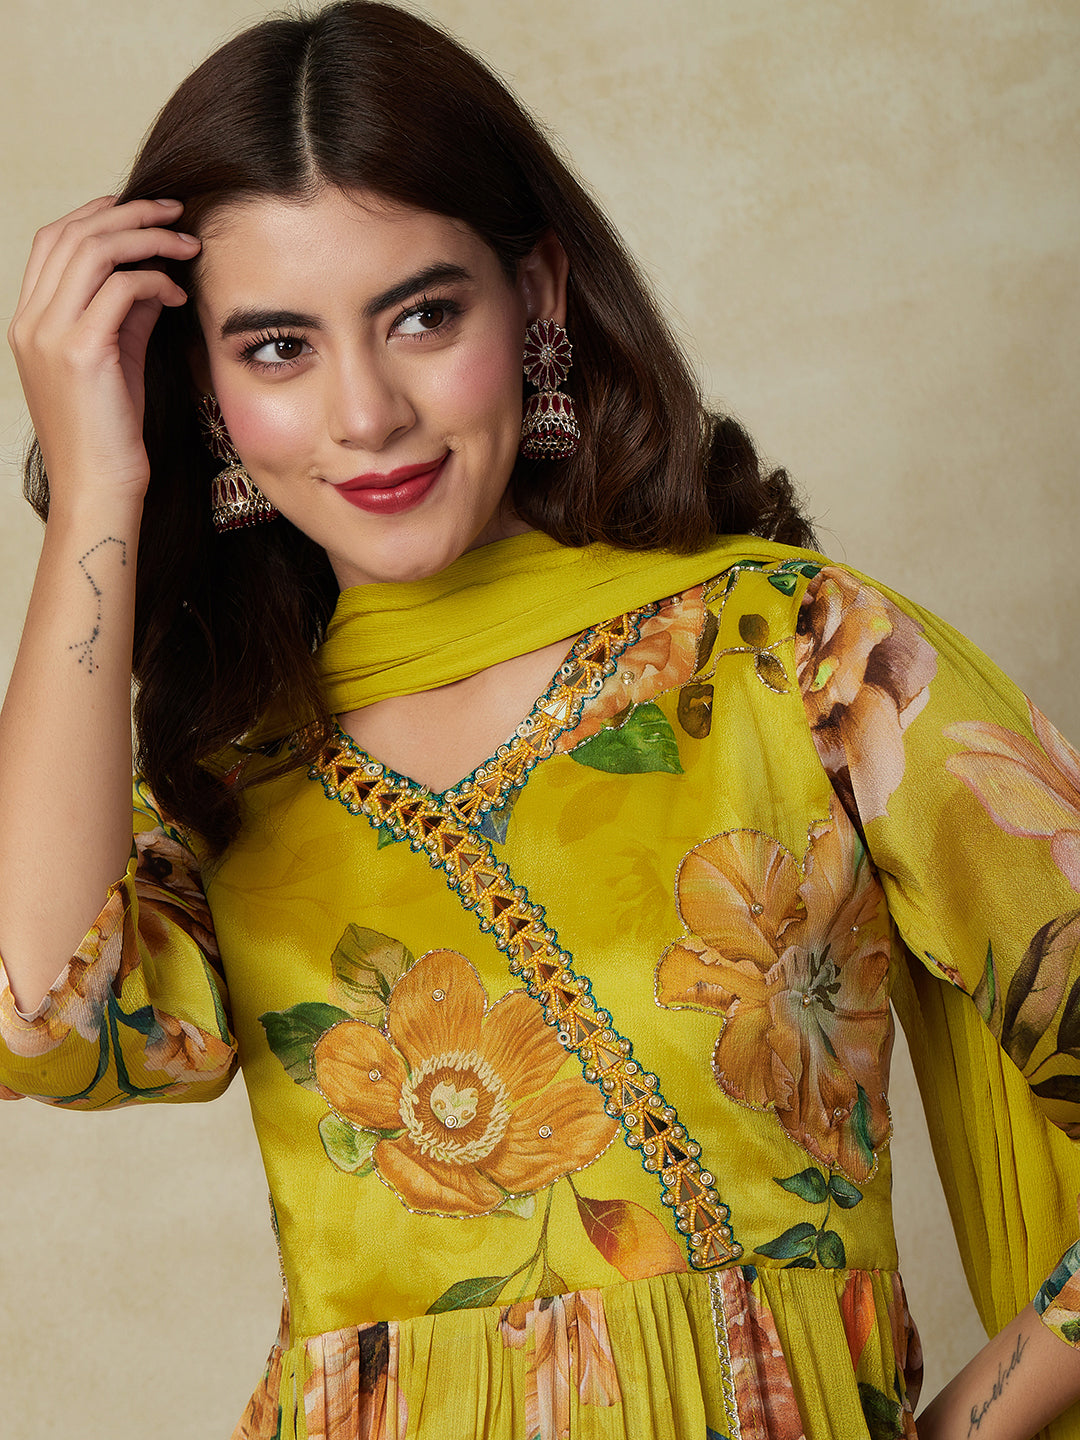 Floral Printed & Embroidered A-Line Pleated Kurta with Pant & Dupatta - Lime Green